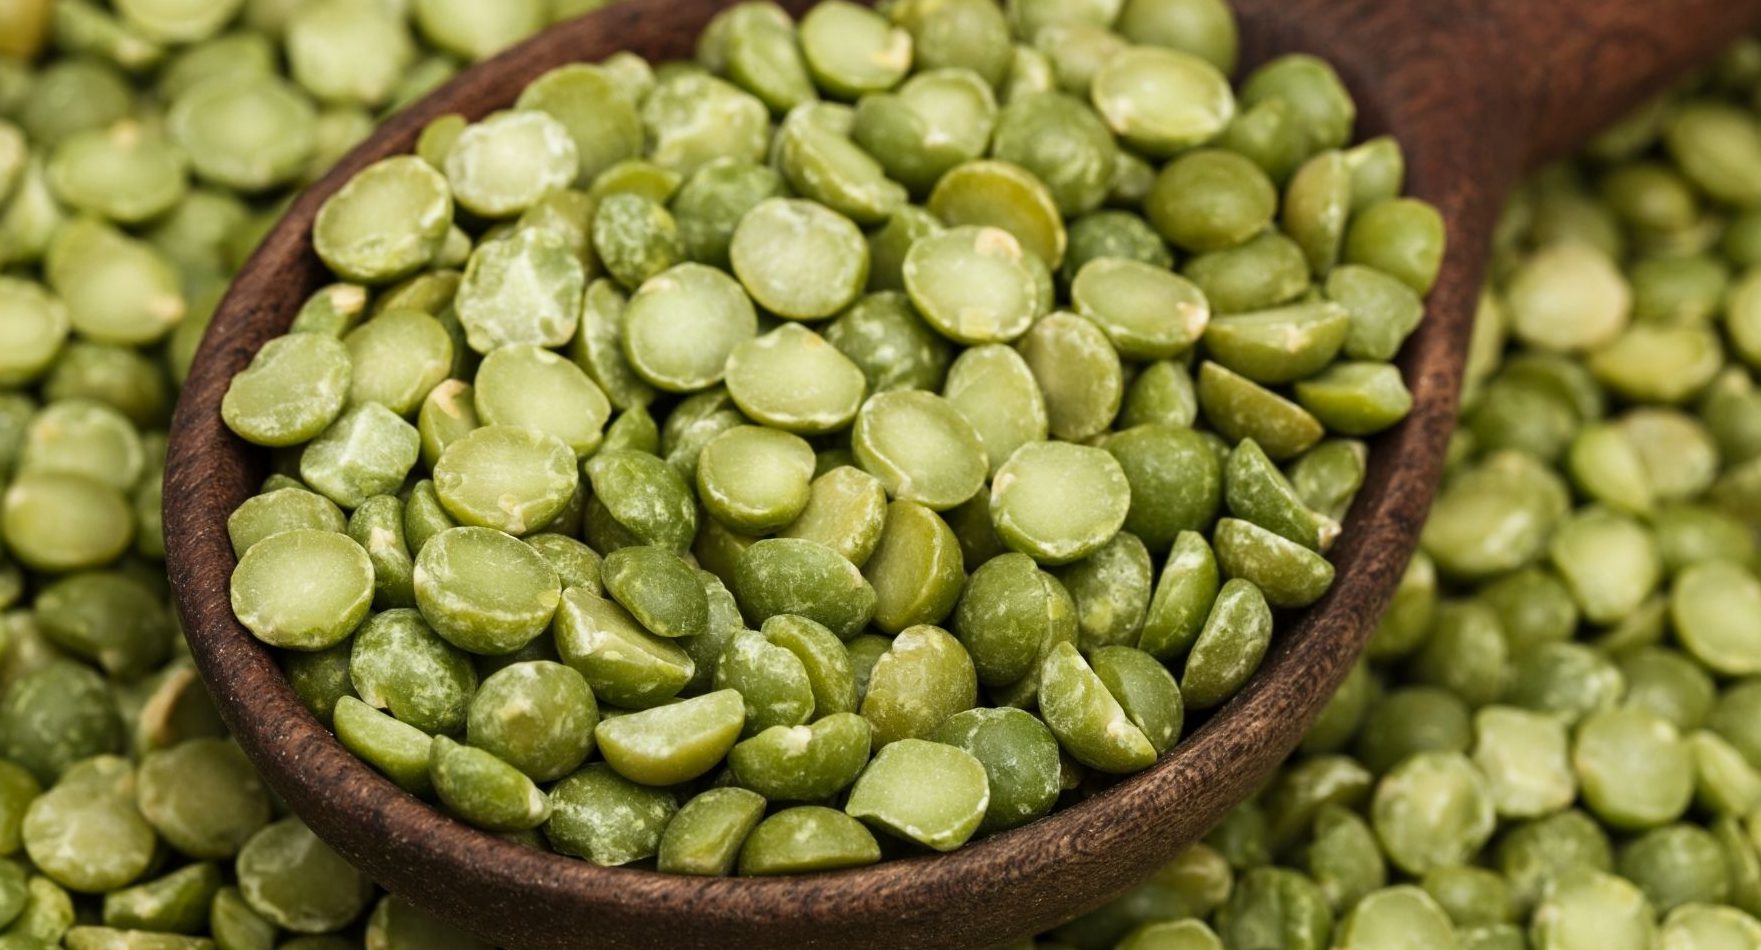 Global Dried Peas Market Overview And Prospects – Includes Dried Peas Market Size